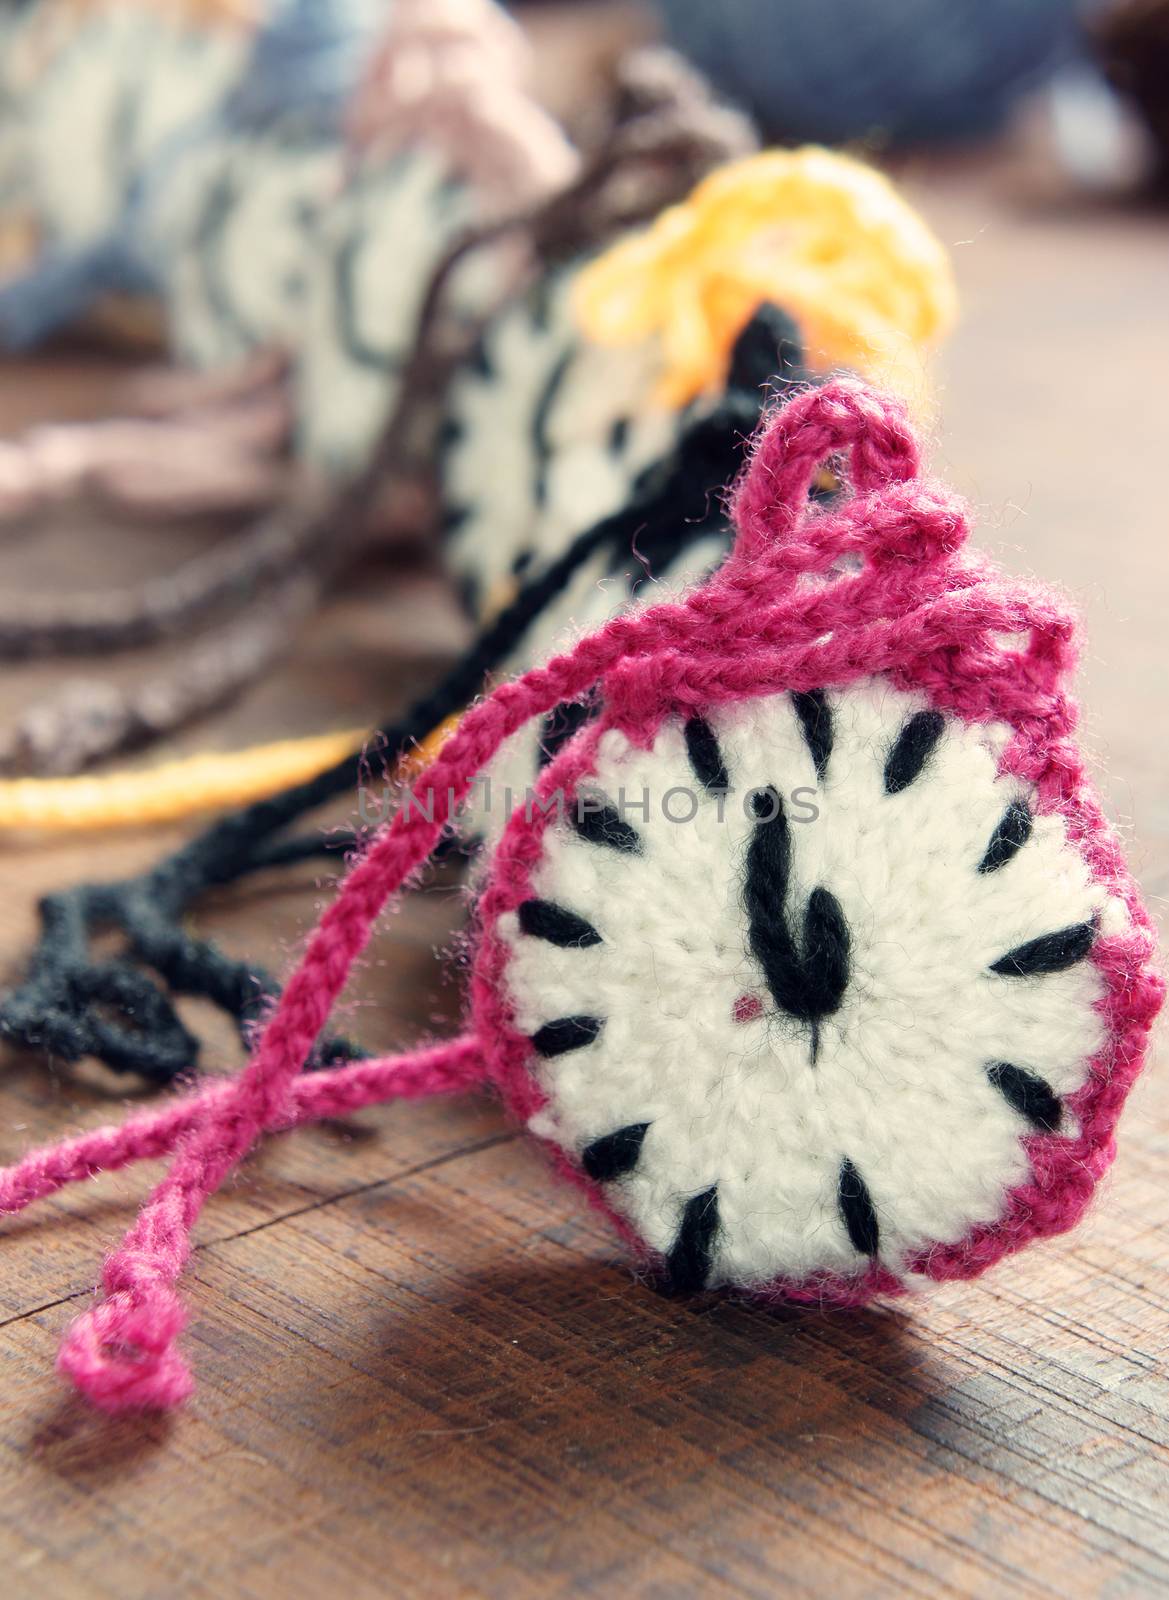 knitted clock, colorful watch, handmade hobby by xuanhuongho